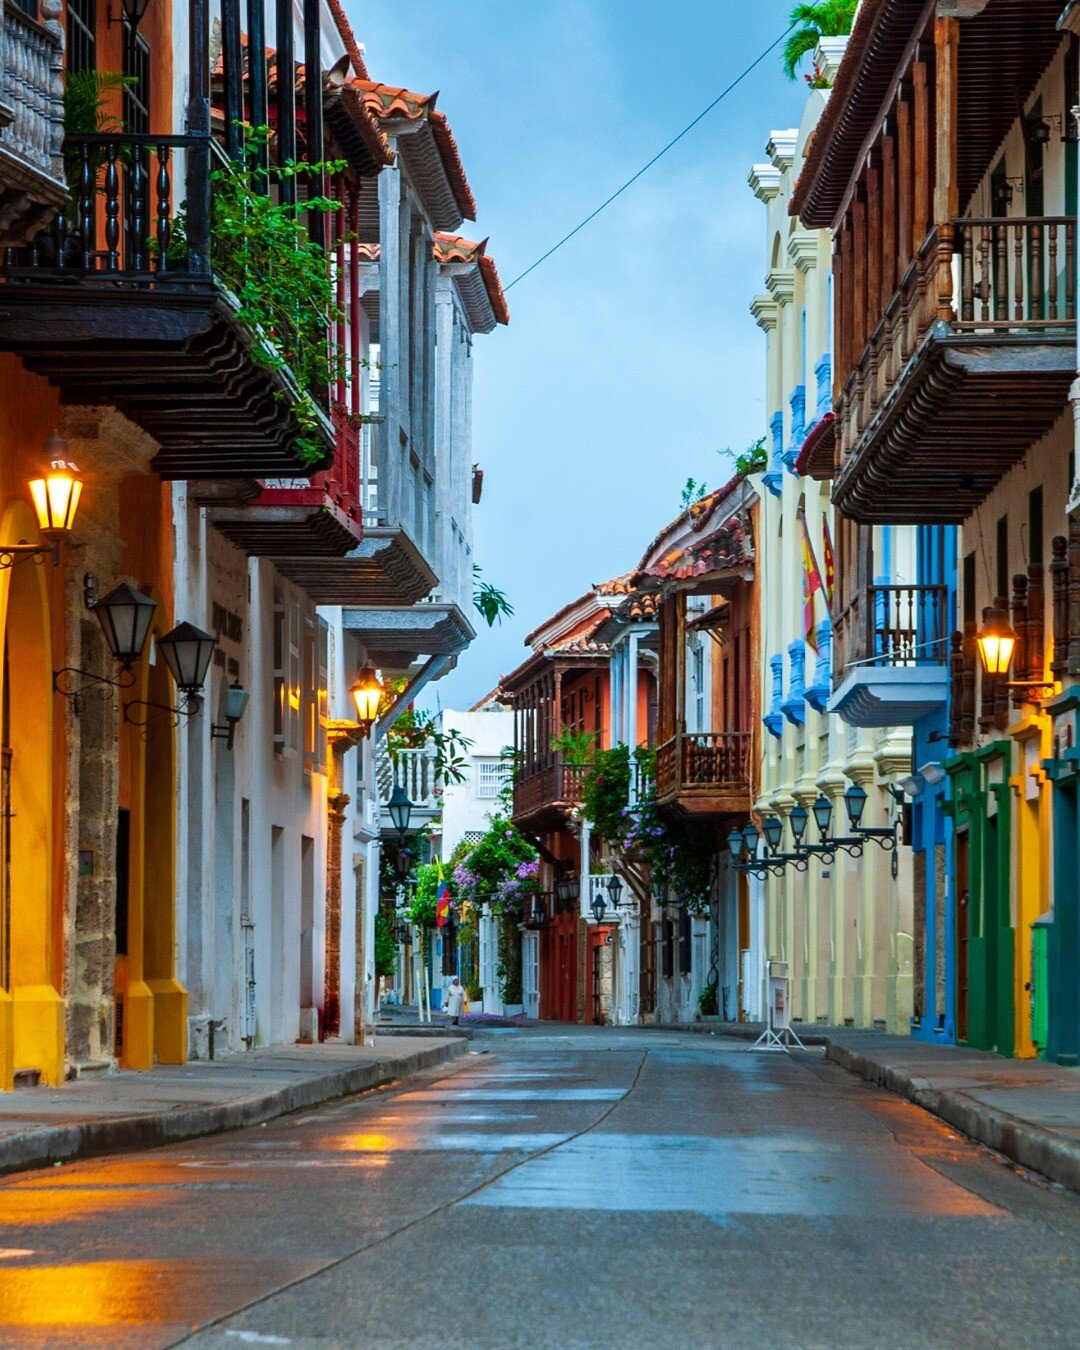 Take a walk with me on the beautiful streets of our city! 🌆

Check out our 7 room boutique villa at https://airbnb.com/h/casa-cartagena and book your stay with us!

#casalacartujita #privatevilla #travellife #luxuryvillacartagena #privatevillacartag